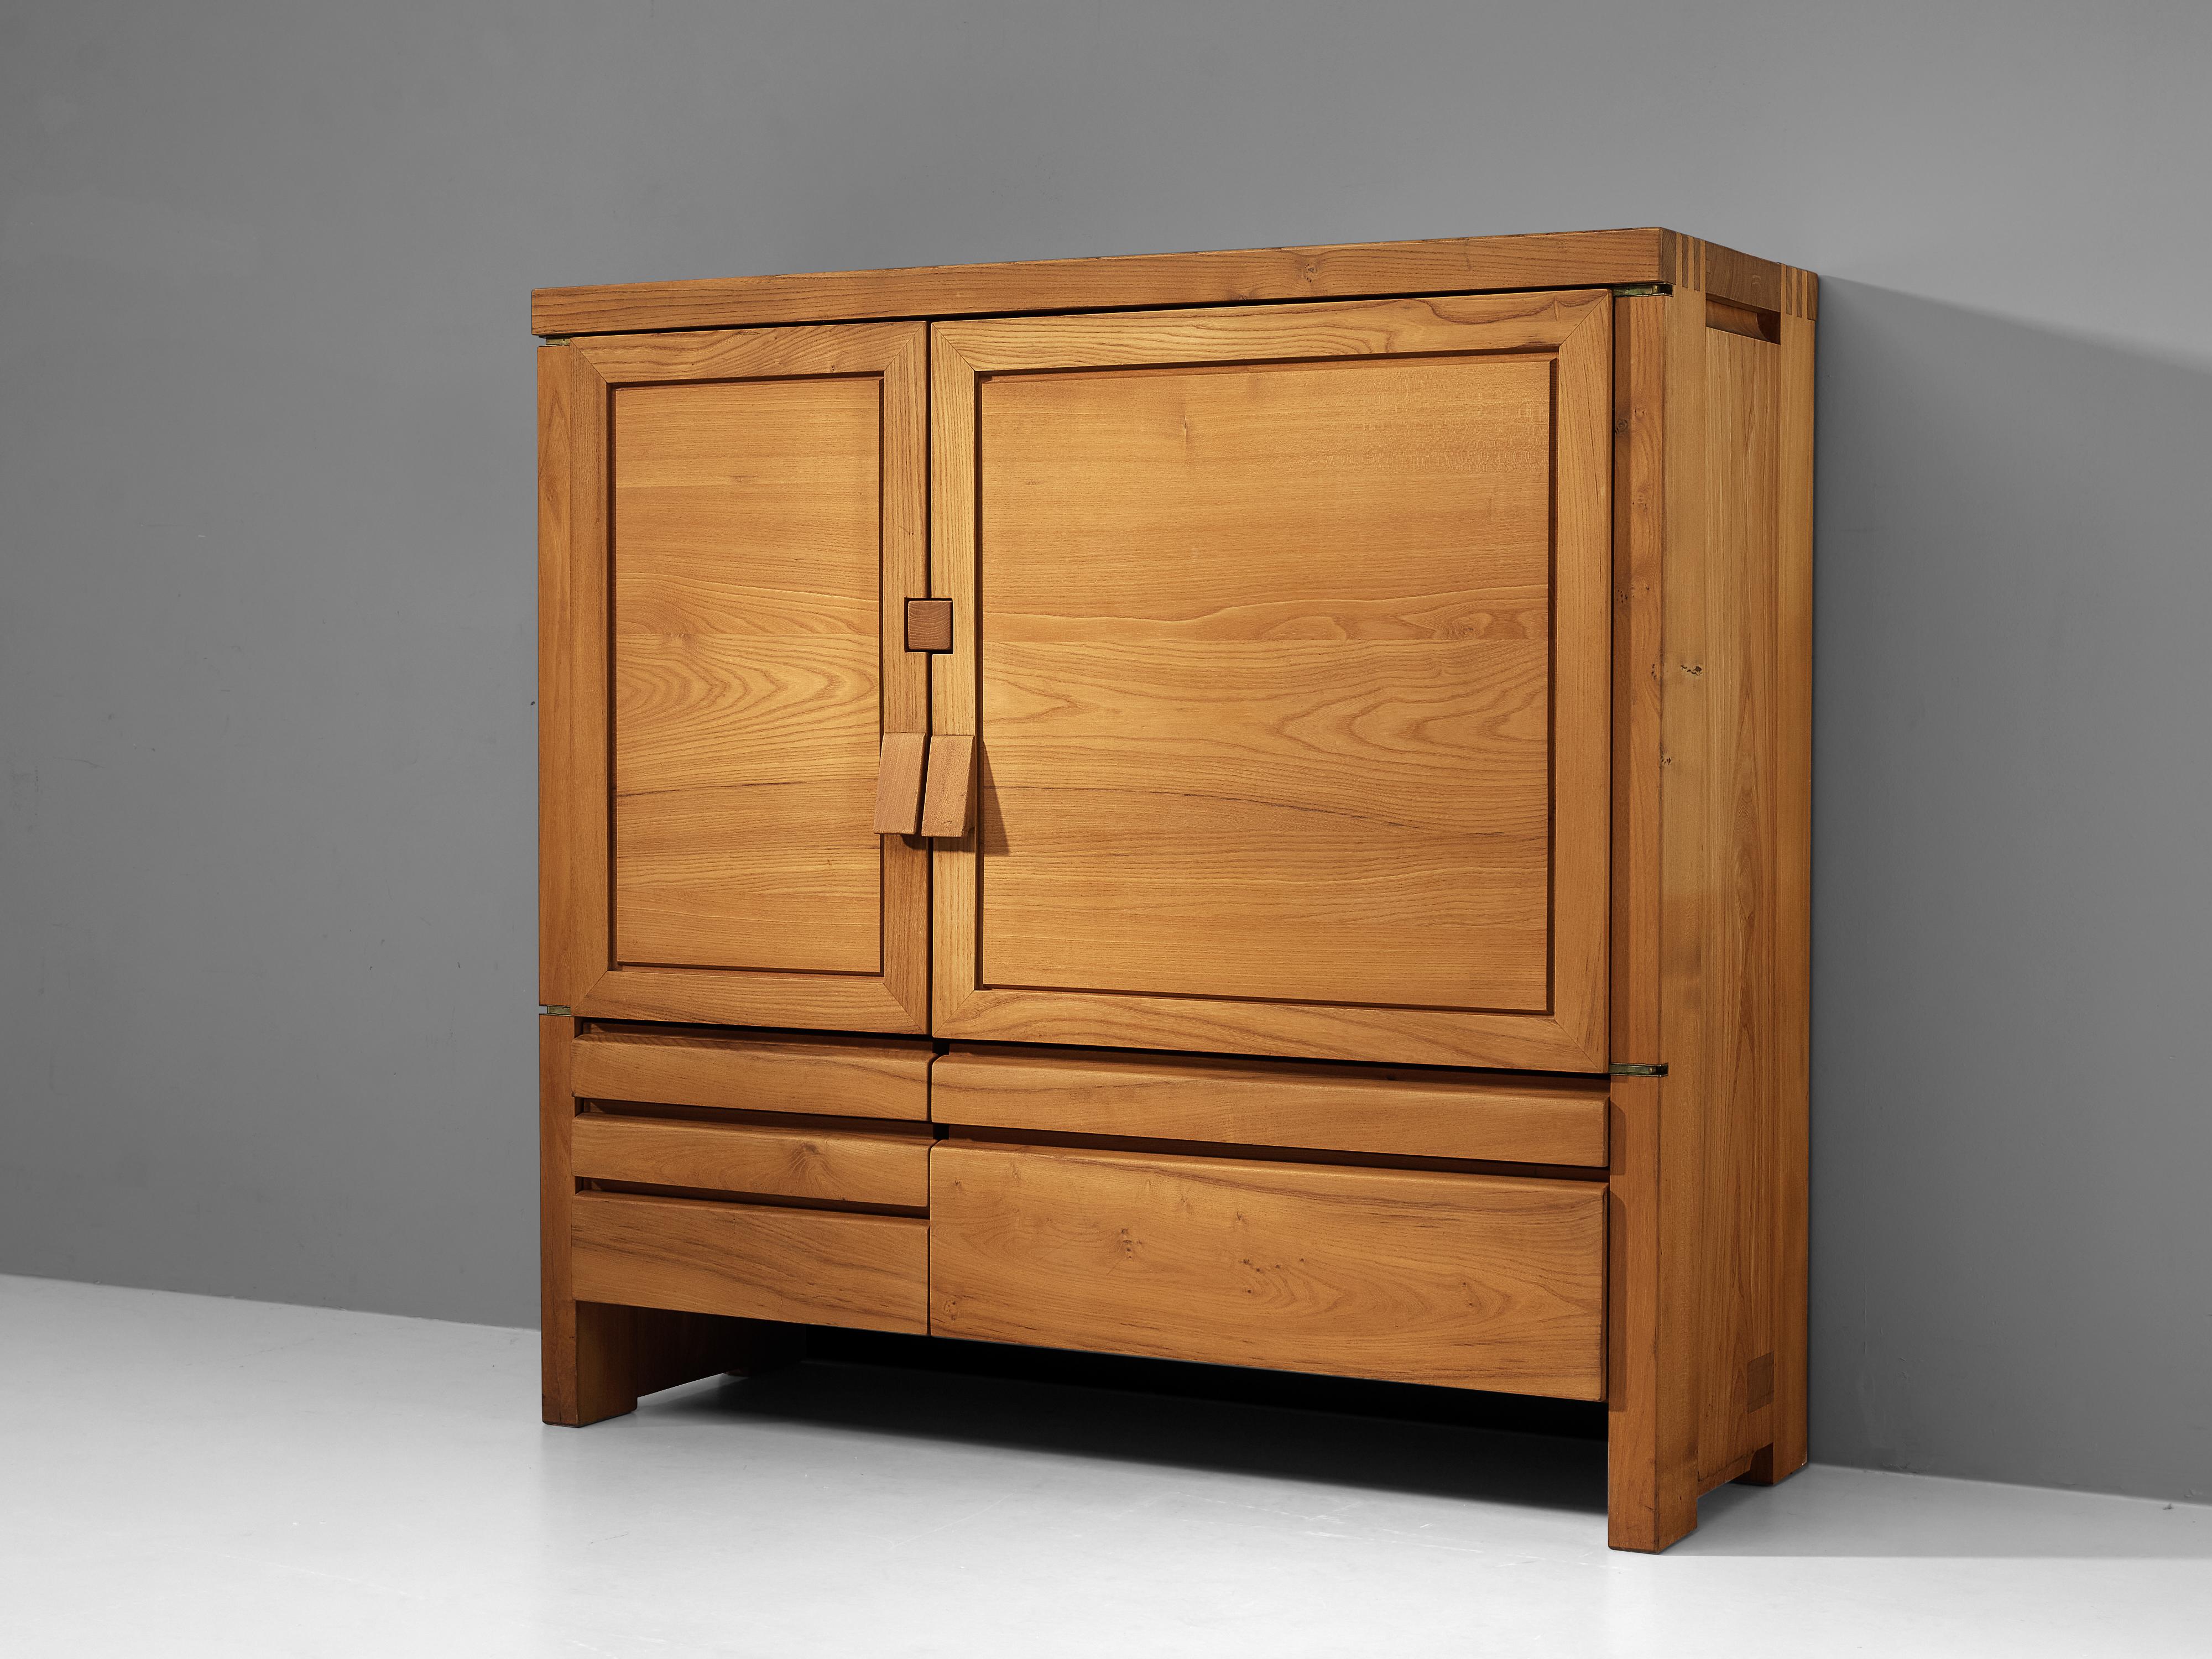 Pierre Chapo, cabinet model 'R18', solid elm, France, late 1960s

This exquisitely crafted cabinet combines a simplified yet complex design combined with nifty, solid construction details that characterize Chapo's work. Two doors of different